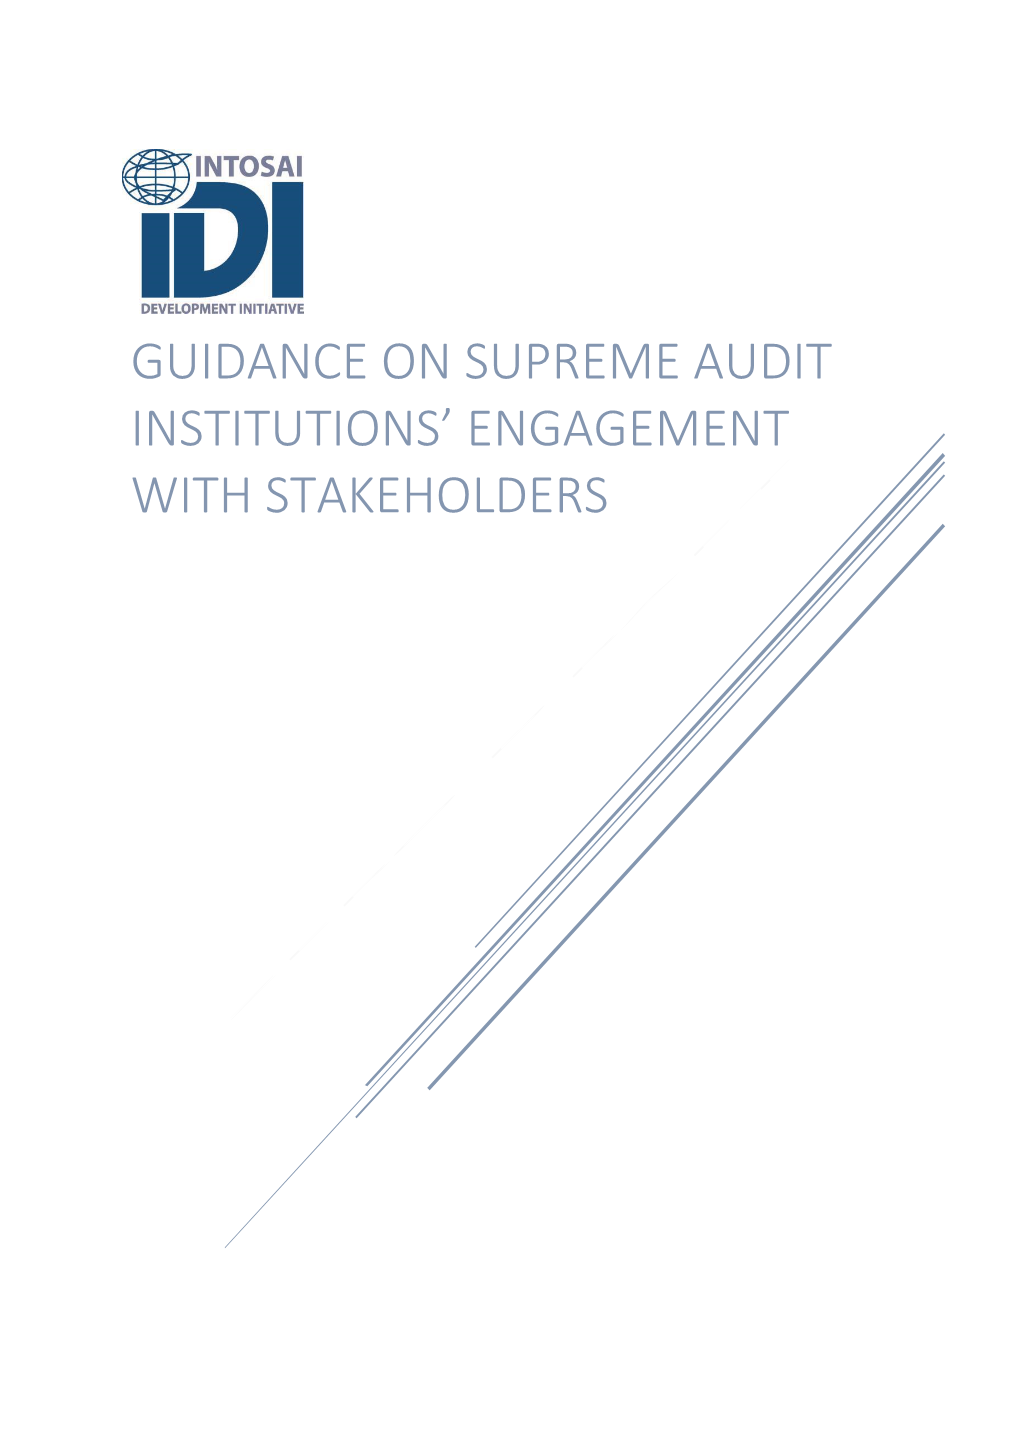 Pdfguidance on Supreme Audit Institutions' Engagement with Stakeholders